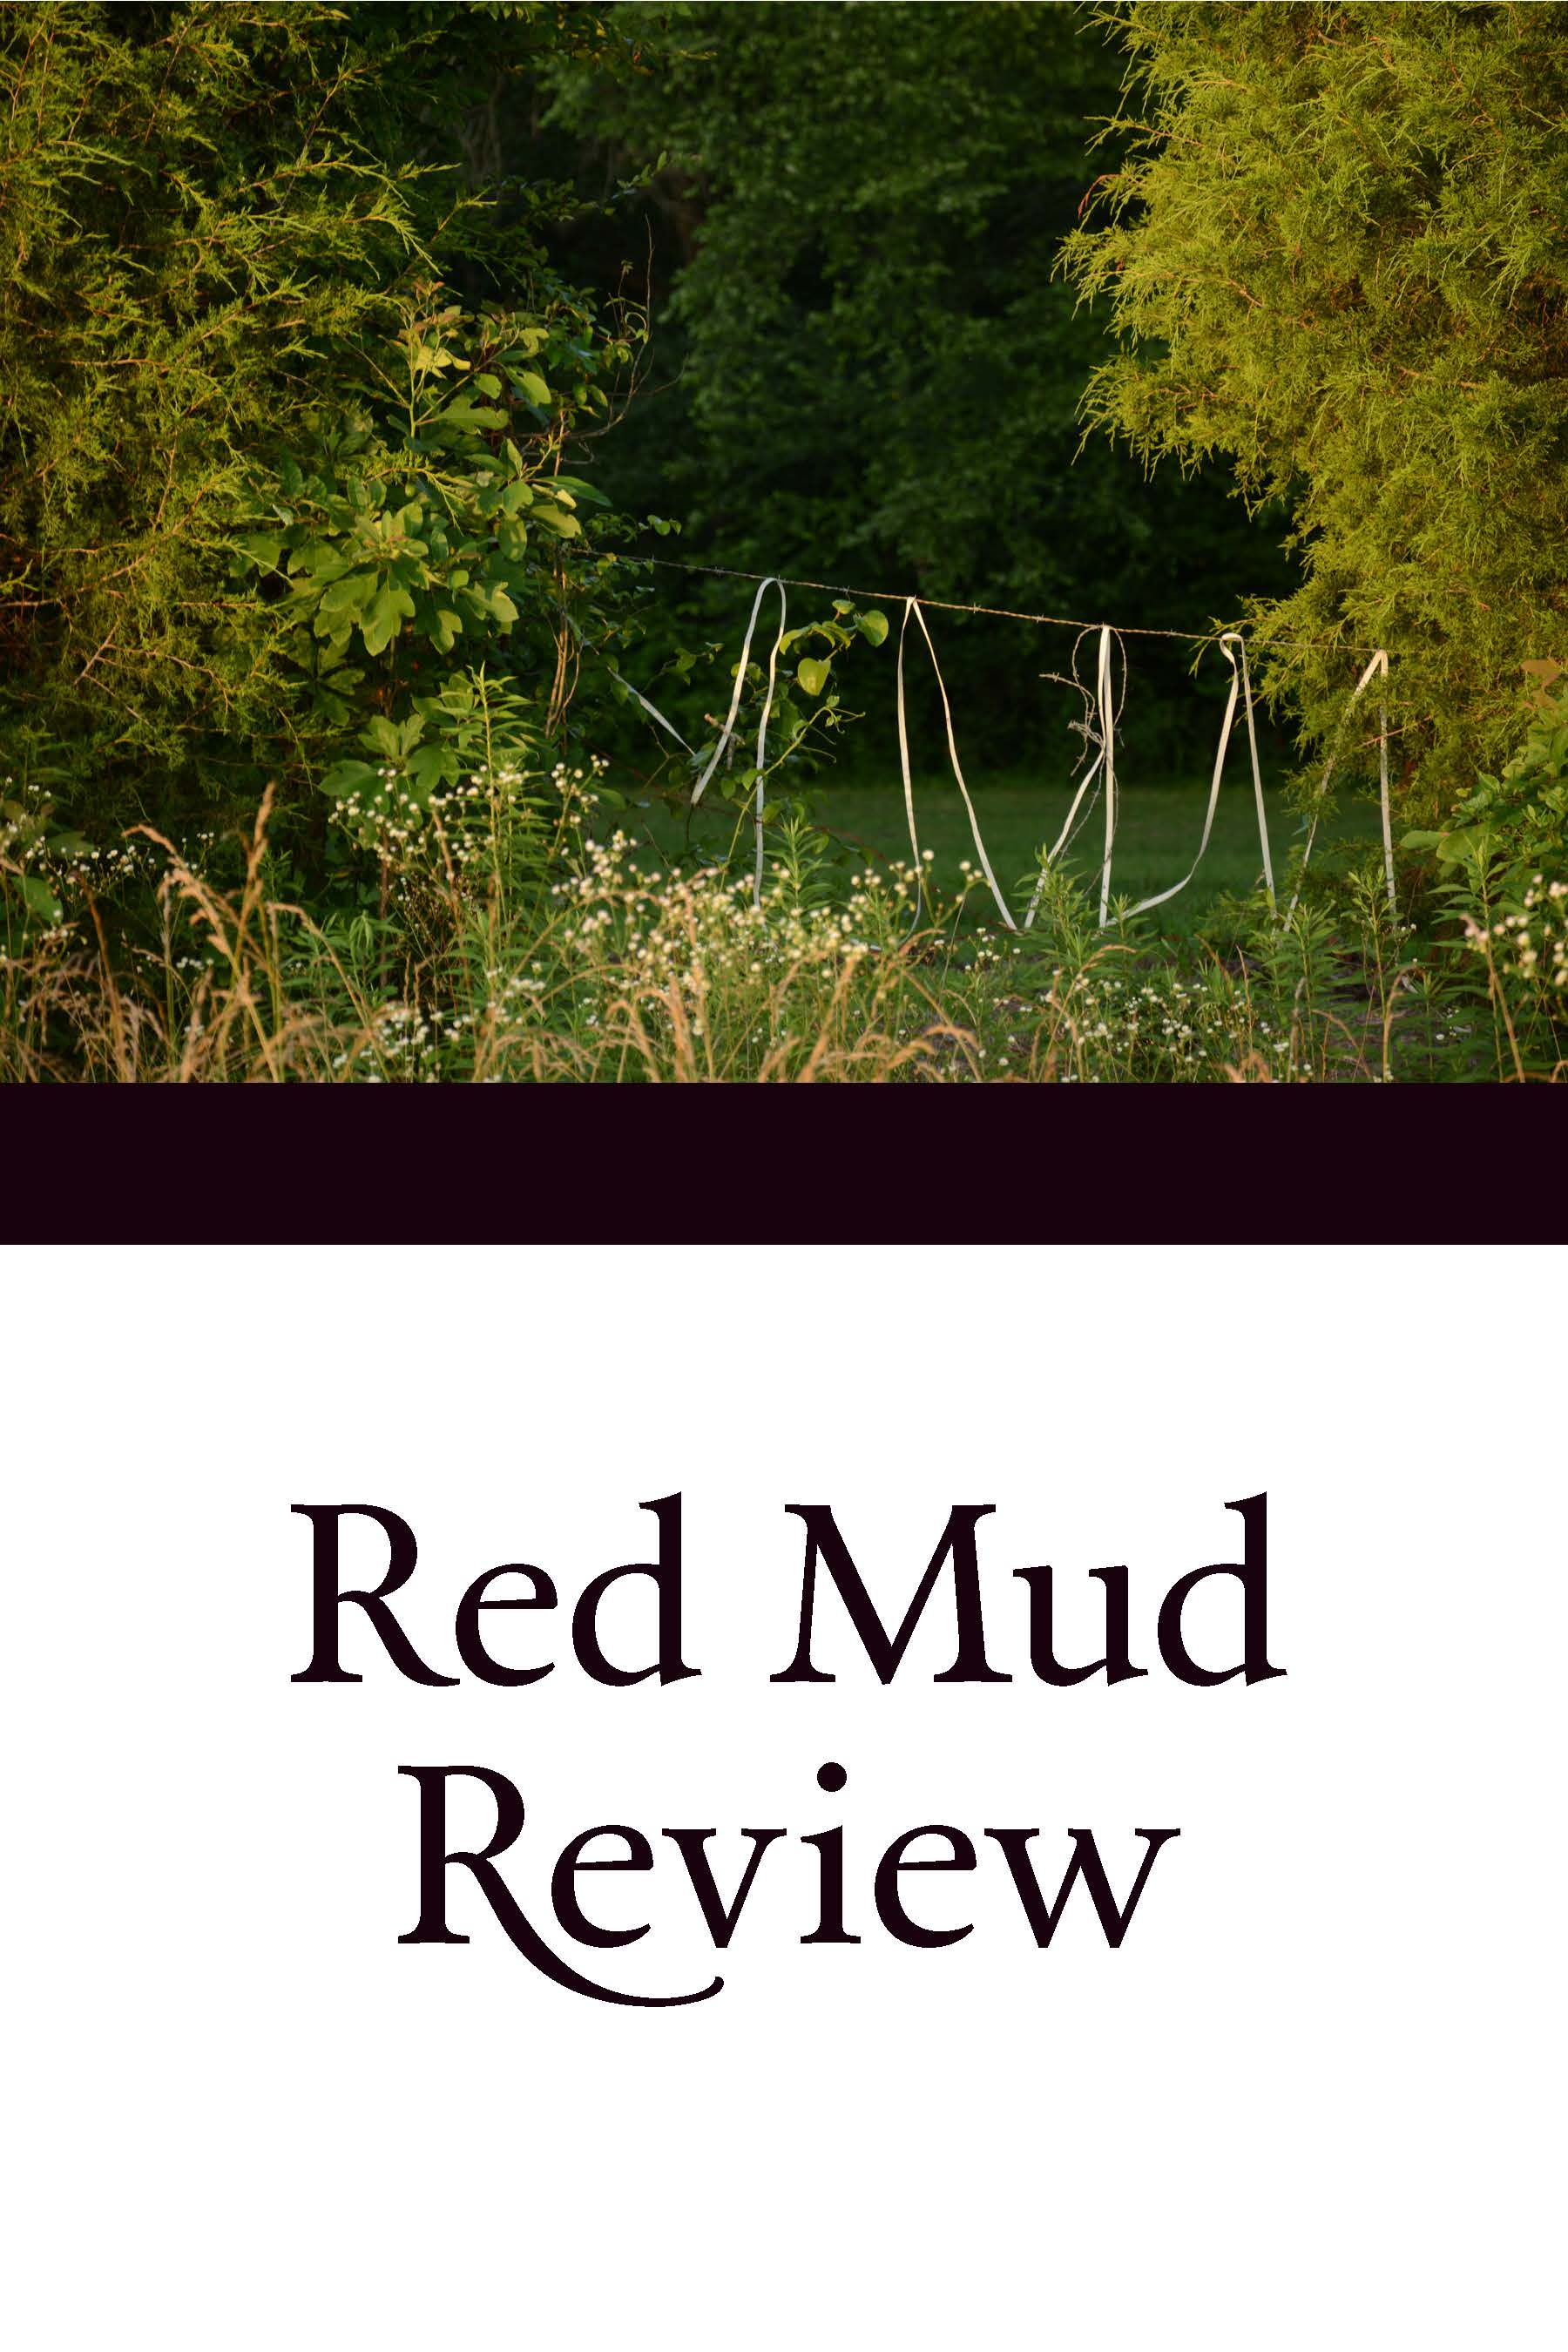 Red Mud Review Cover 2014-2015